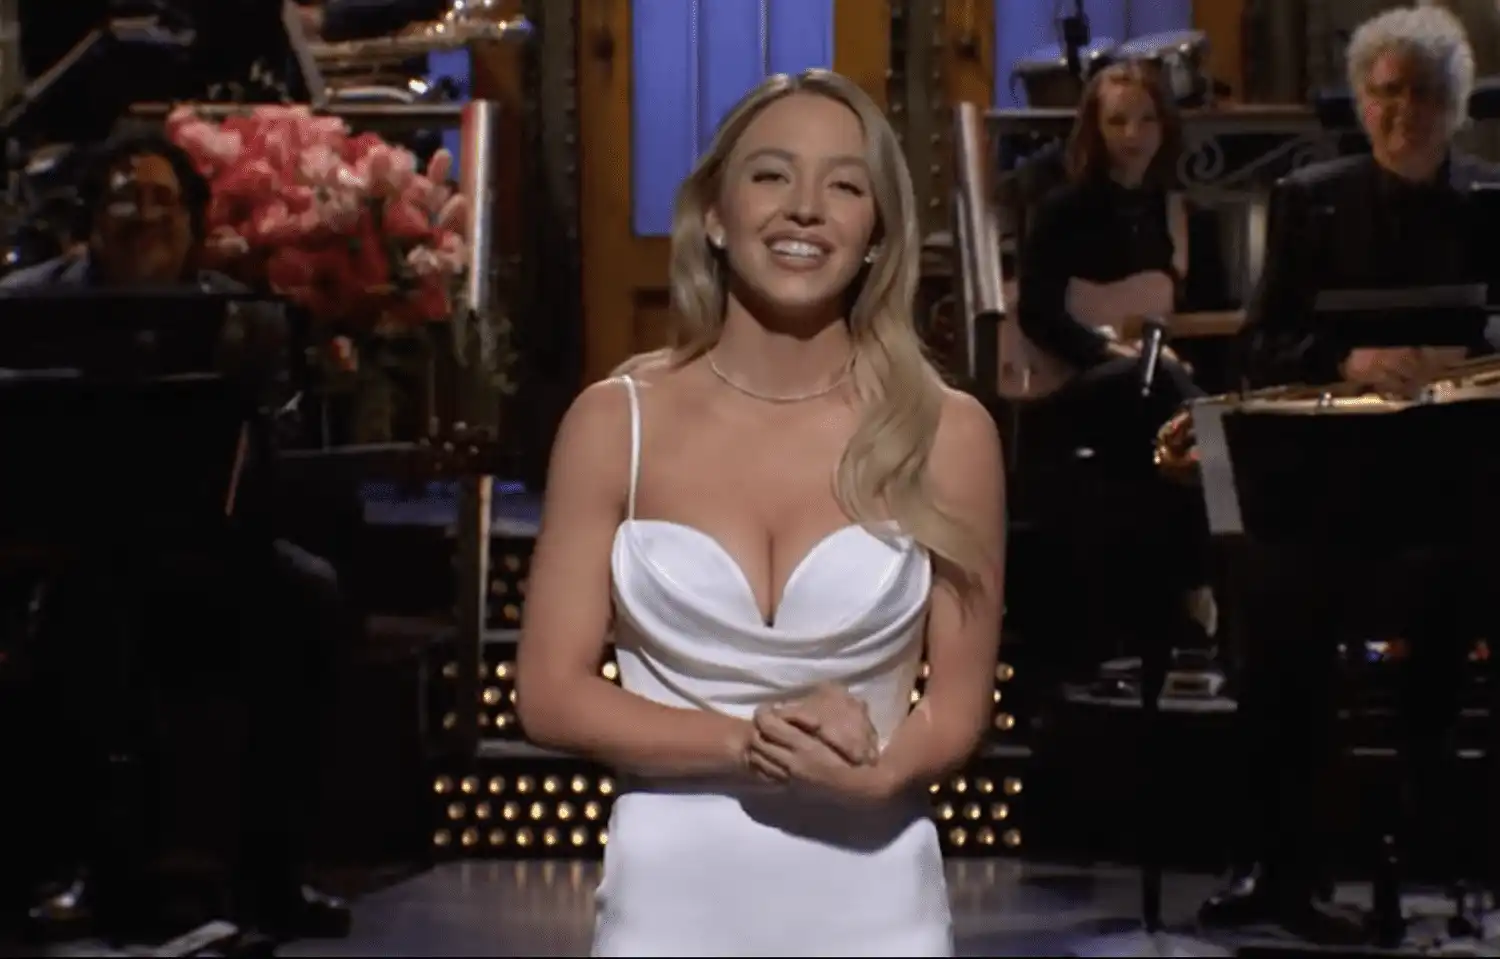 SNL recap: Sydney Sweeney hosts with Kacey Musgraves for Gen Z audience